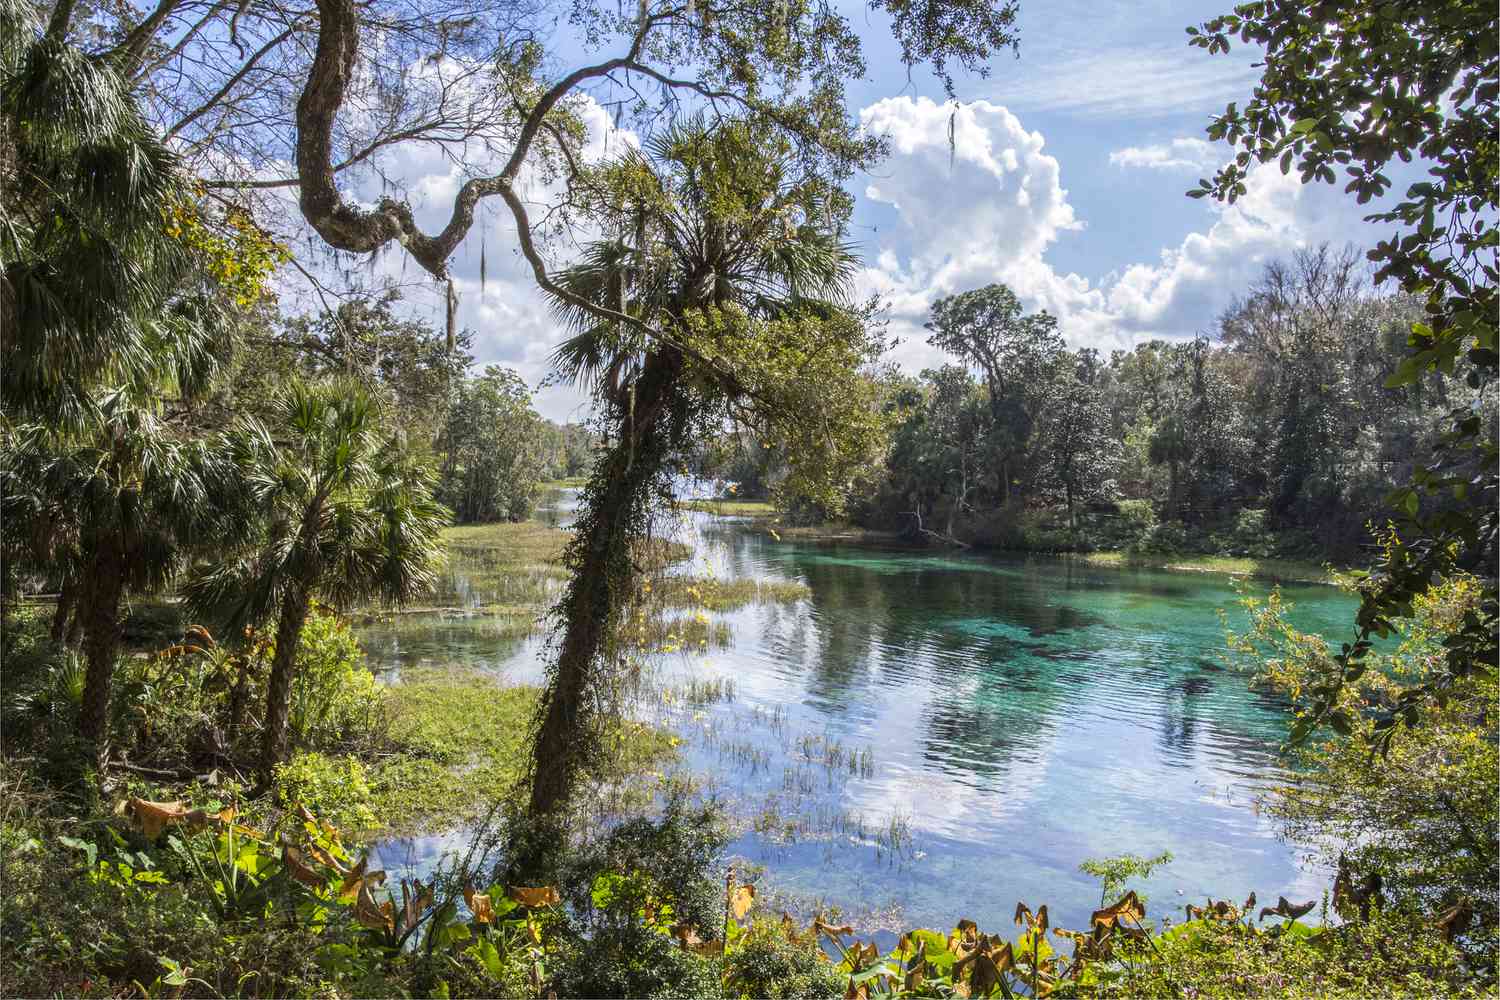 13-facts-about-local-wildlife-and-natural-reserves-in-apopka-florida